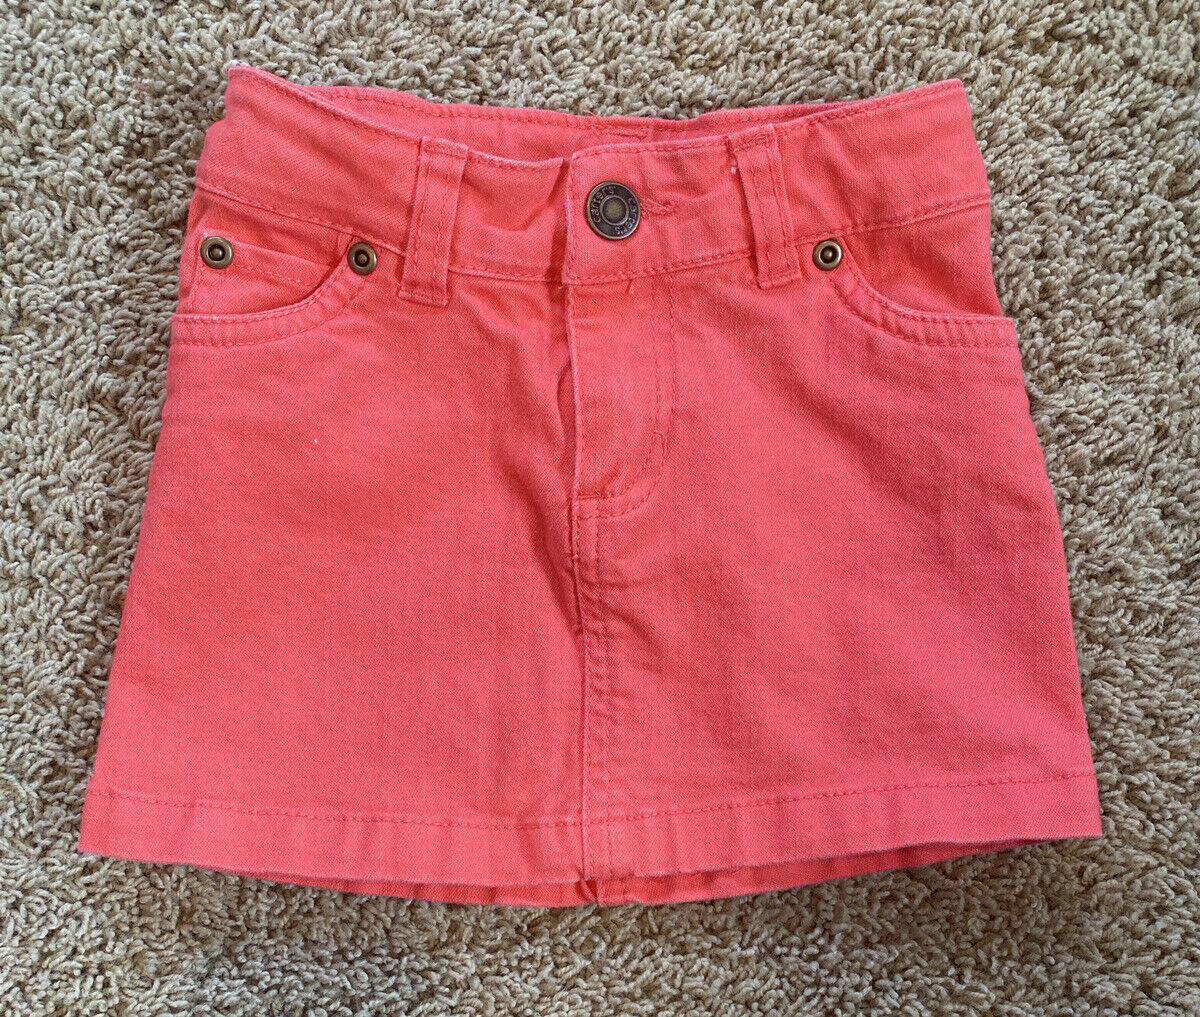 Carter’s Girls Size 3t Coral Orange Stretch Jean Denim Skirt W/ Included Shorts